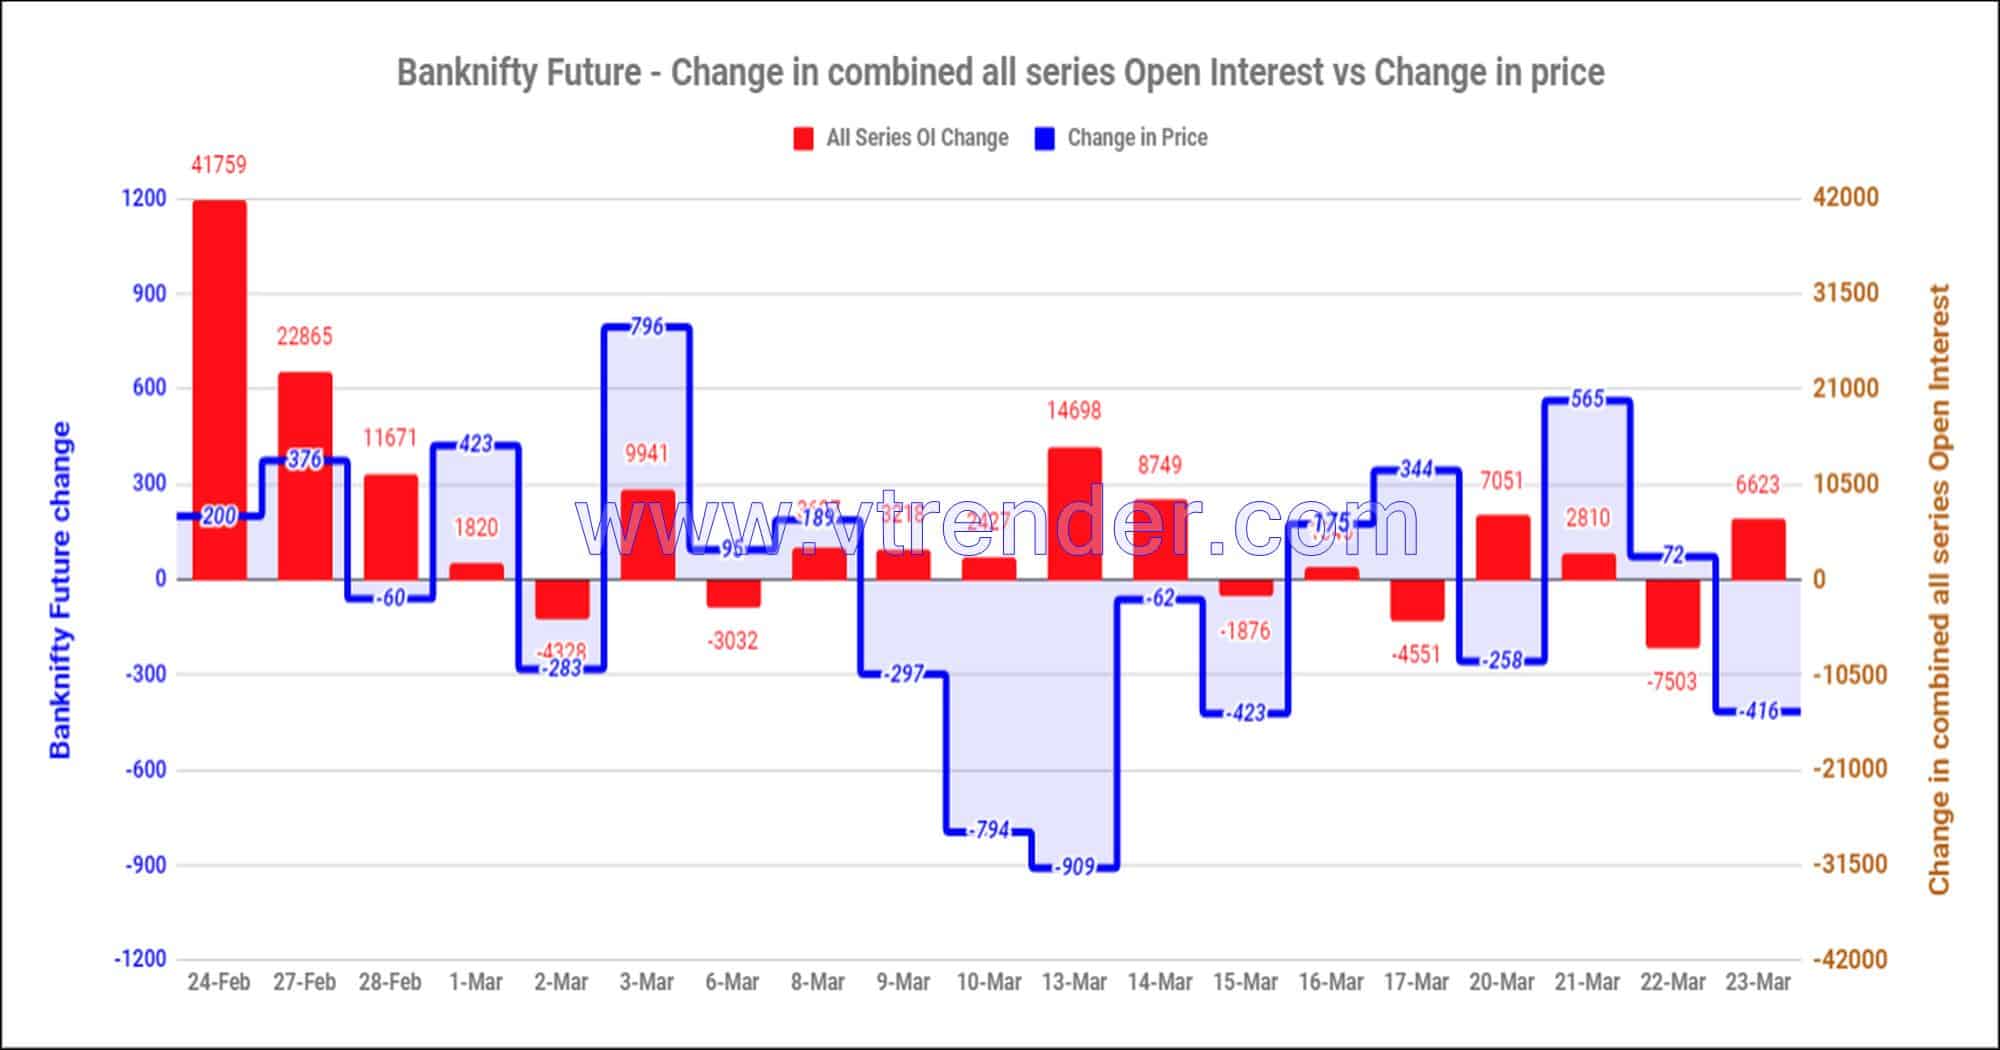 Bnfas23Mar Nifty And Banknifty Futures With All Series Combined Open Interest – 23Rd Mar 2023 Banknifty, Nifty, Open Interest